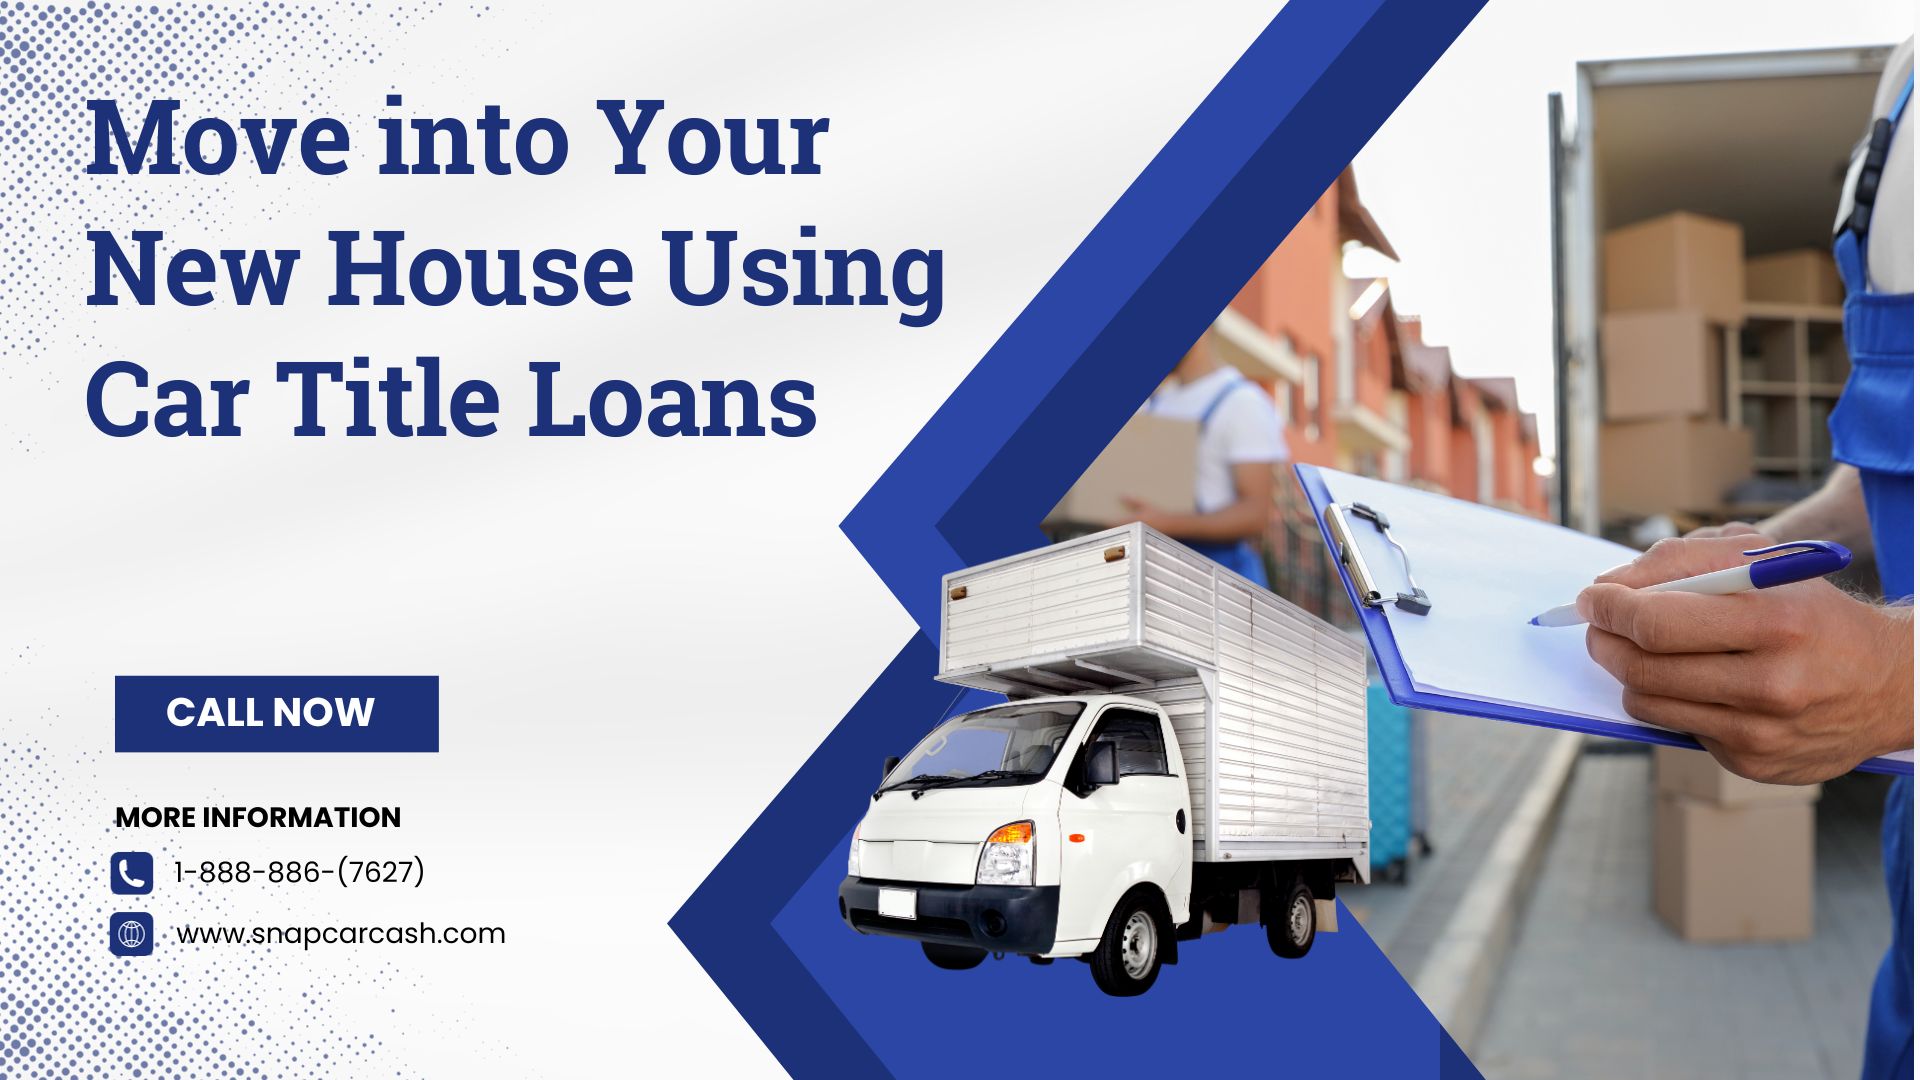 Need Quick Funds to Move into Your New House? Explore Car Title Loans in Edmonton!